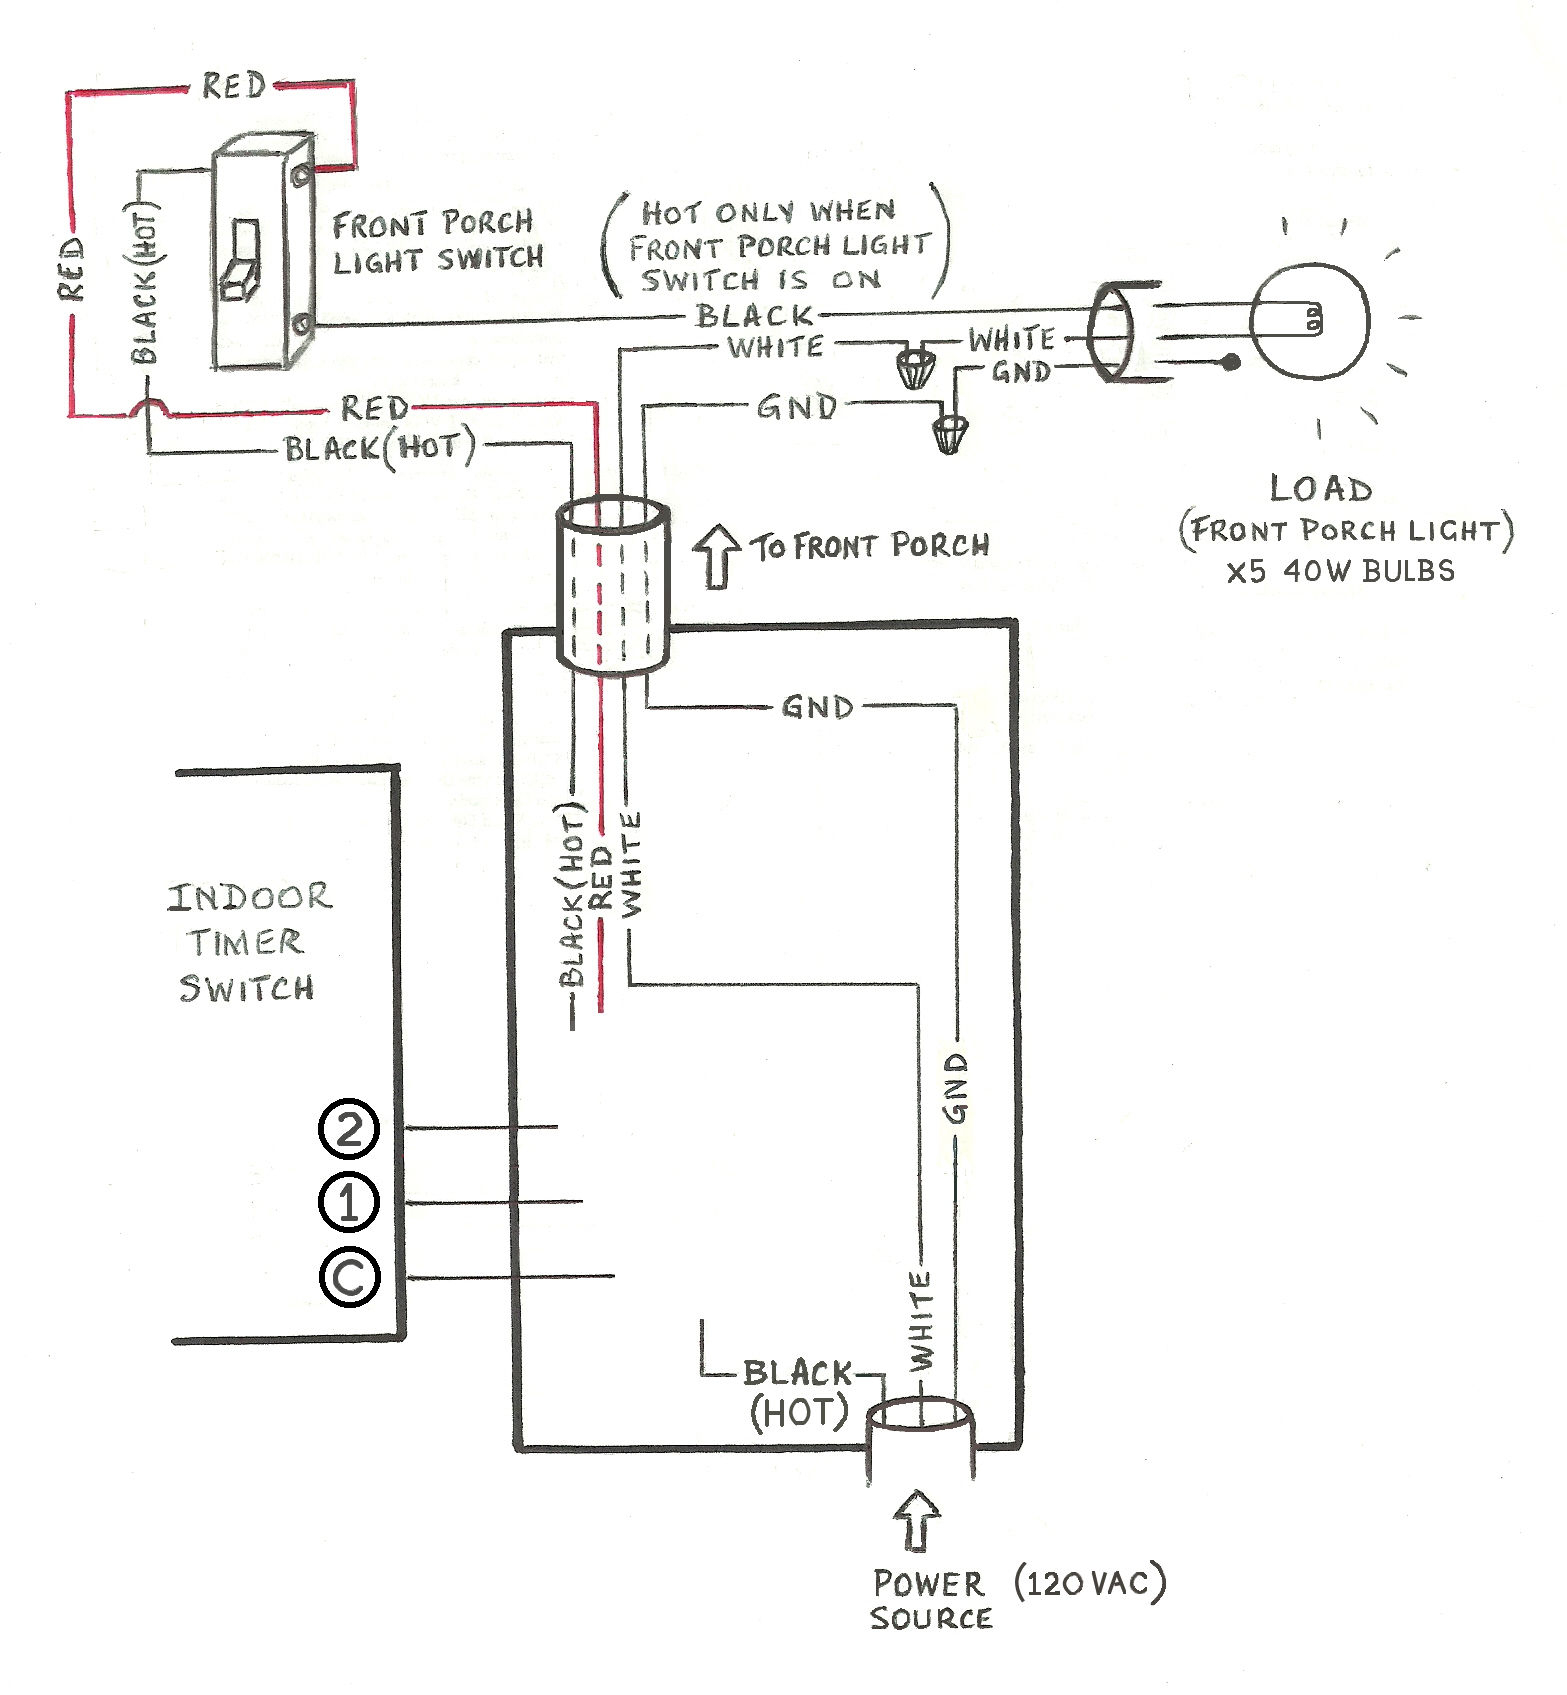 Need Help Wiring A 3-Way Honeywell Digital Timer Switch - Home - Switch Wiring Diagram